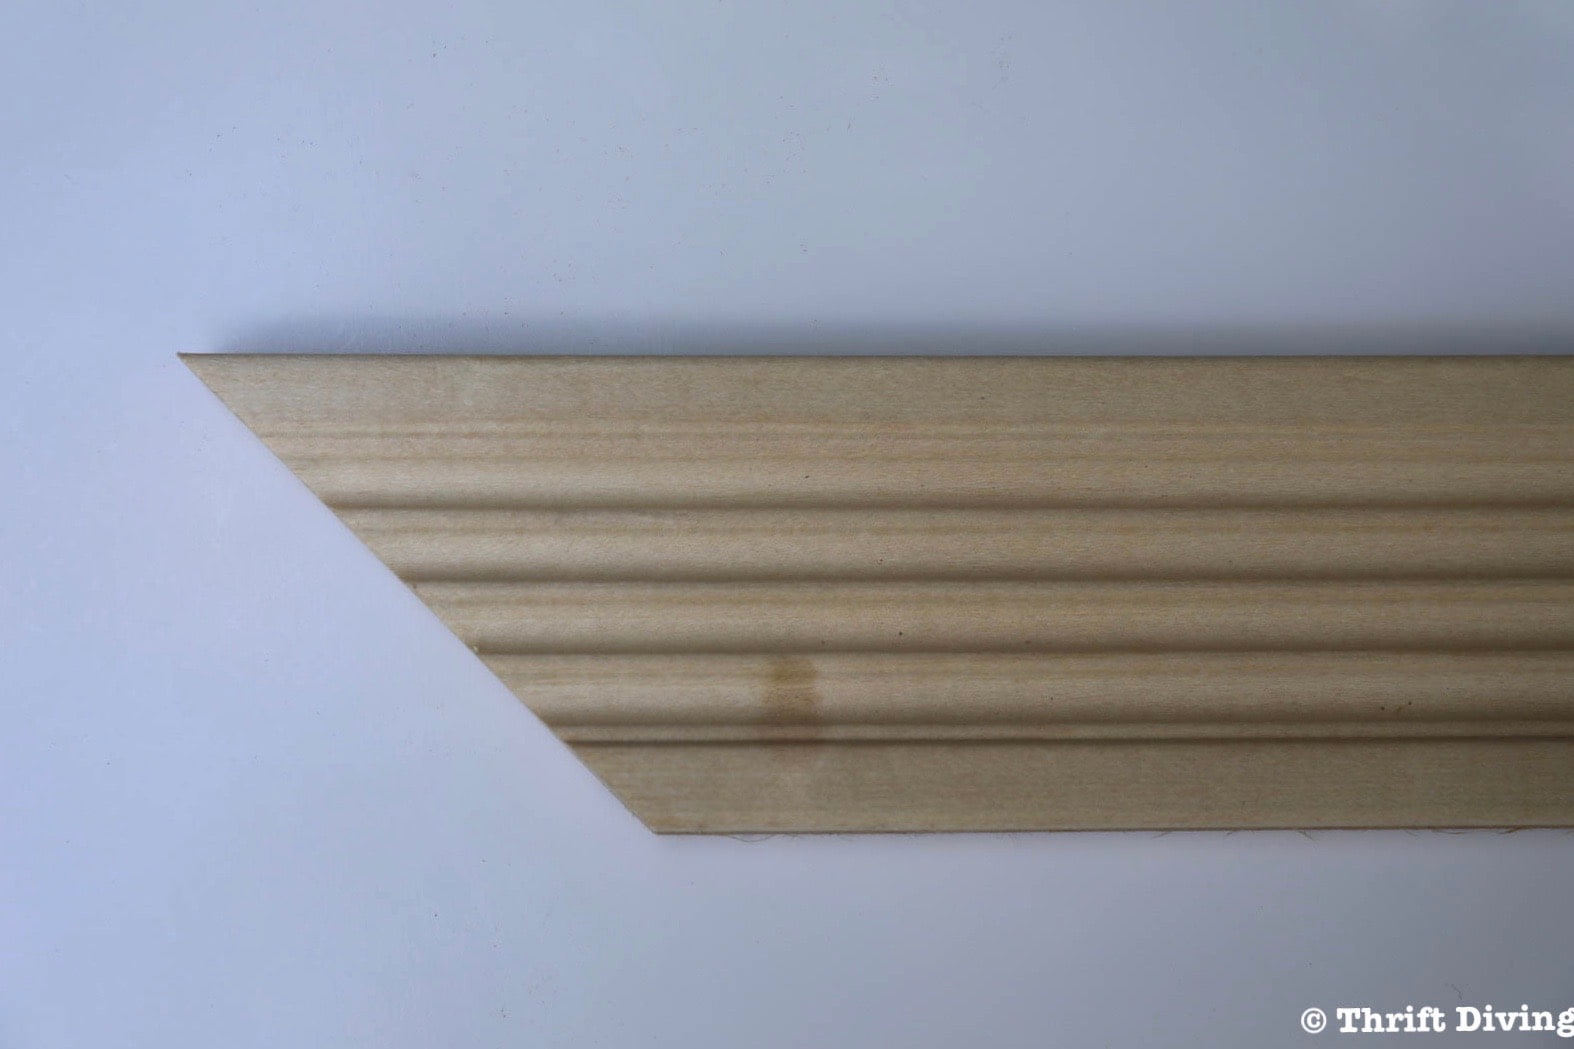 How to Make a Big DIY Whiteboard - Cut the trim at 45 degree angles. - Thrift Diving